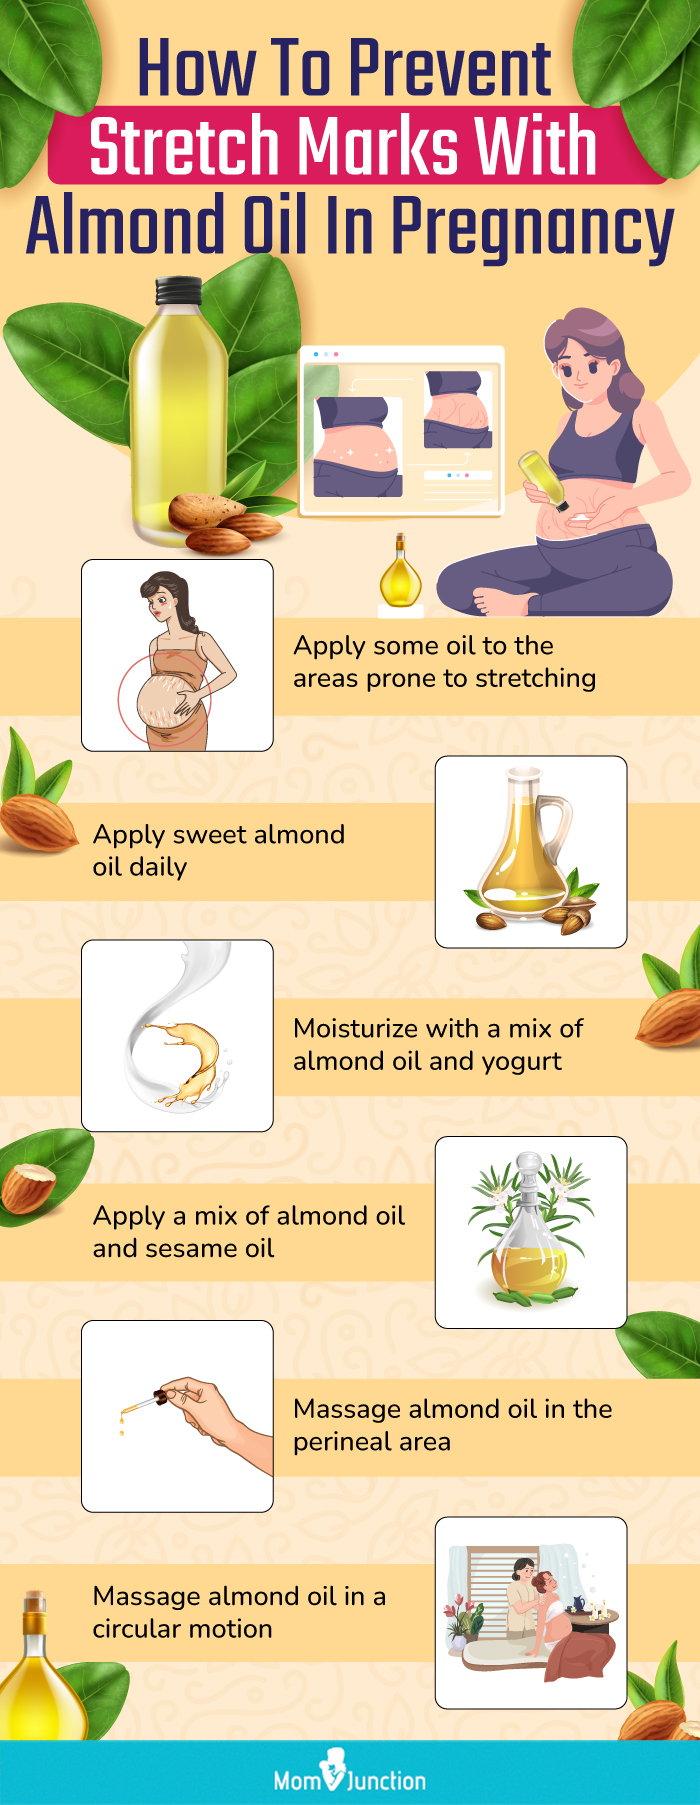 how to prevent stretch marks with almond oil in pregnancy (infographic)